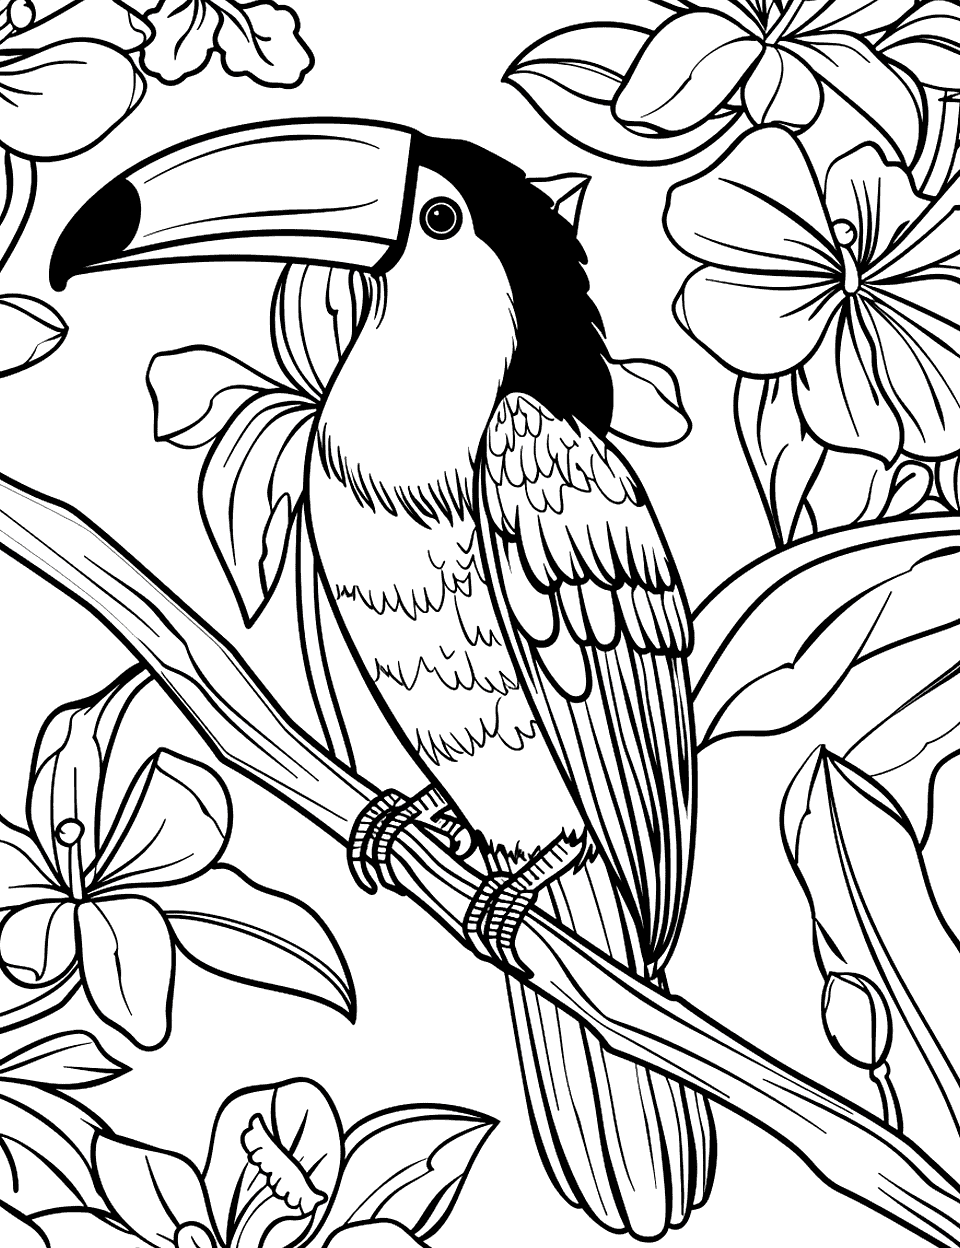 Toucan Bird Among Flowers Parrot Coloring Page - A colorful toucan bird perched beside vibrant simple flowers.